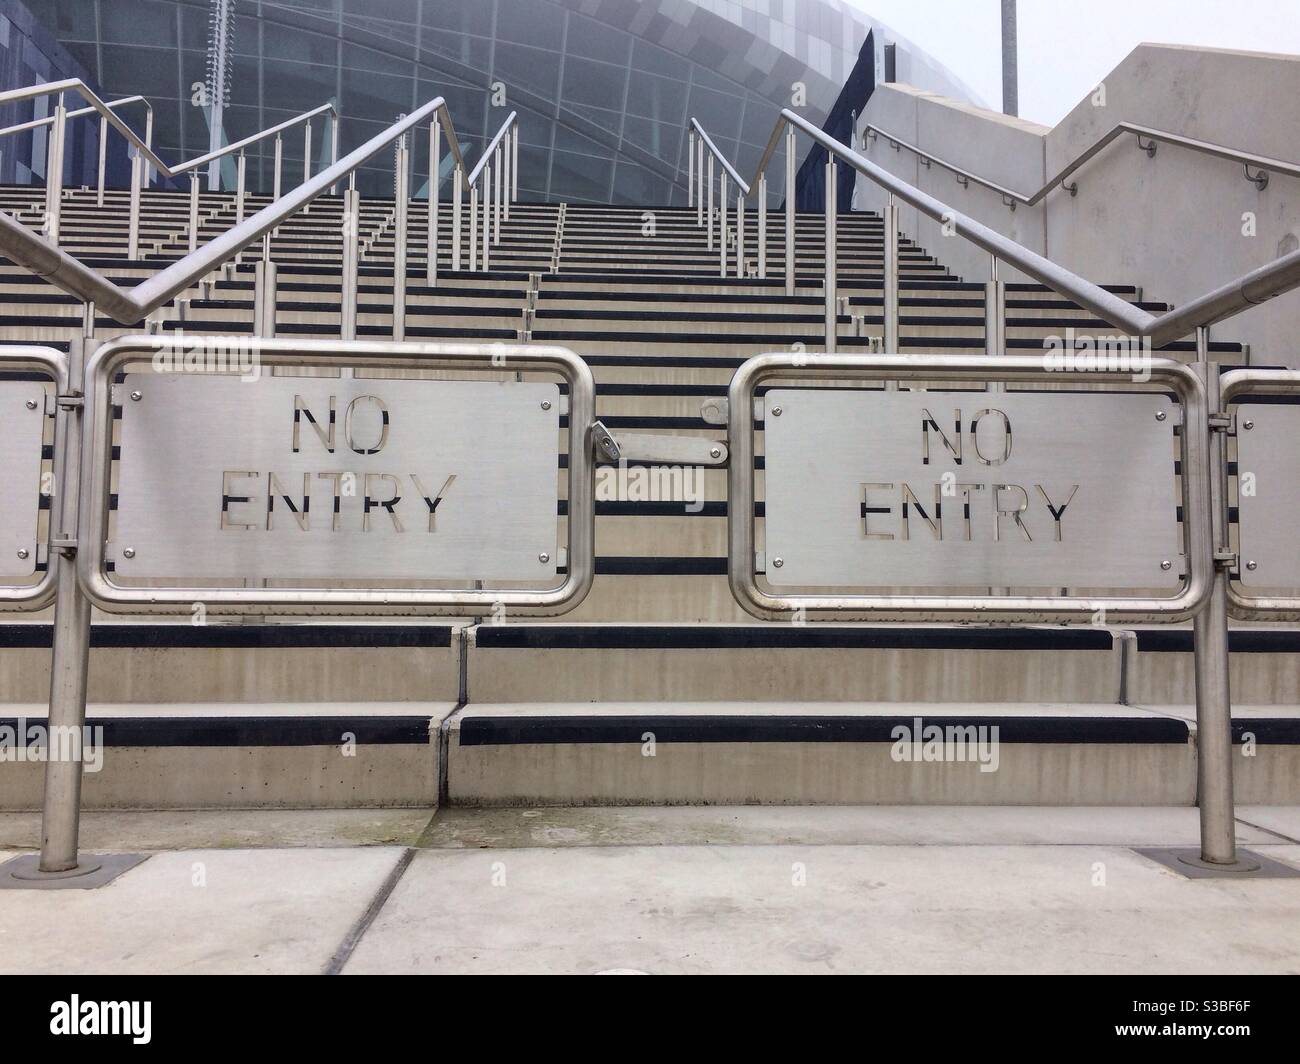 No entry barriers on the steps outside Tottenham Hotspur football stadium Stock Photo